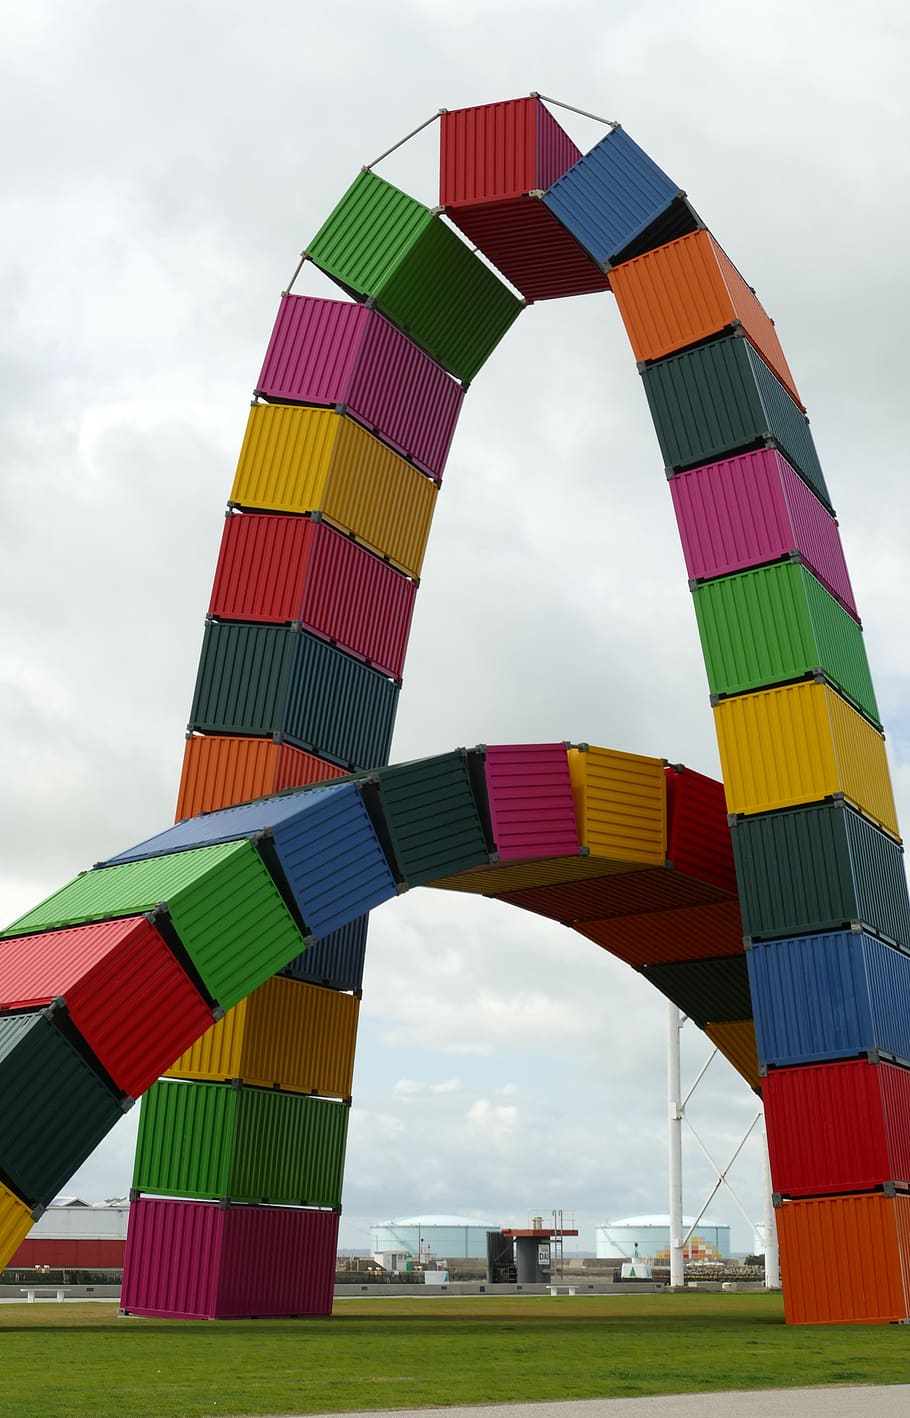 arc, work of art, container, color, le havre, france, metal, sky, cloud - sky, multi colored